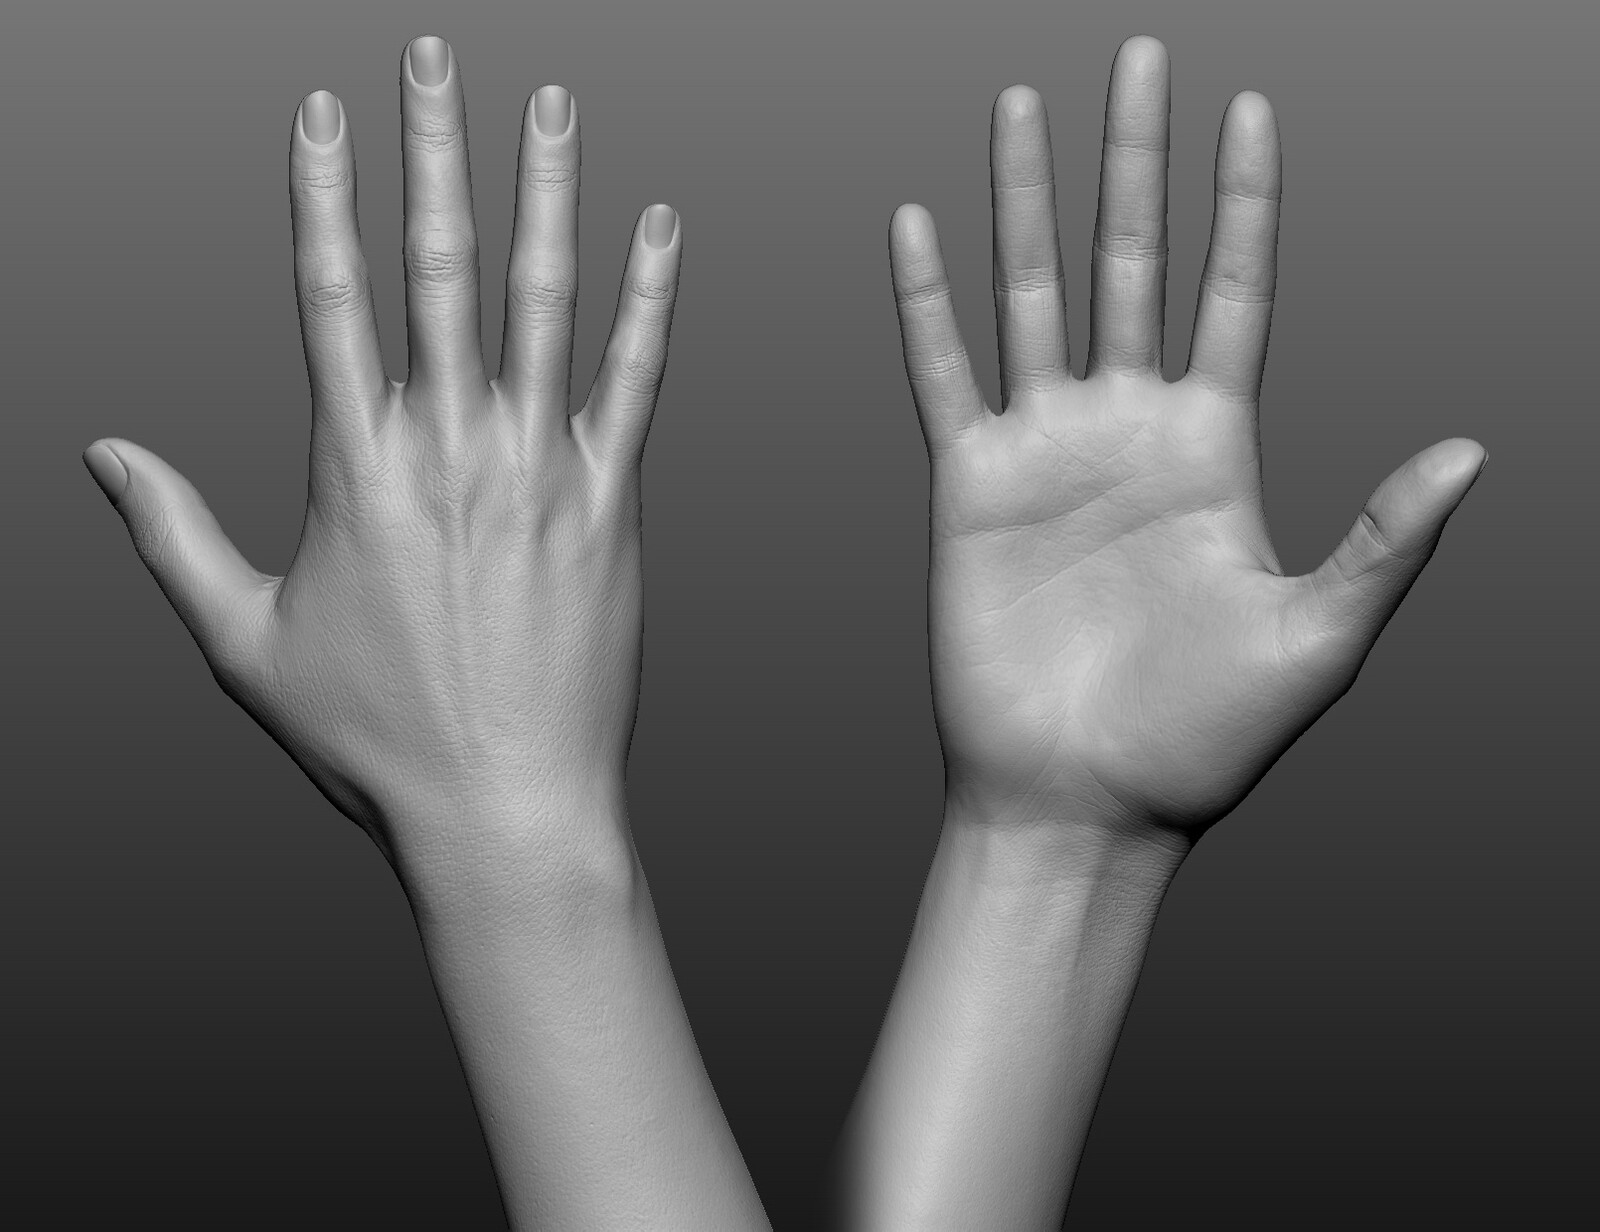 I resurfaced the entire model but the face and hands are of course the most important body parts for cinematics.